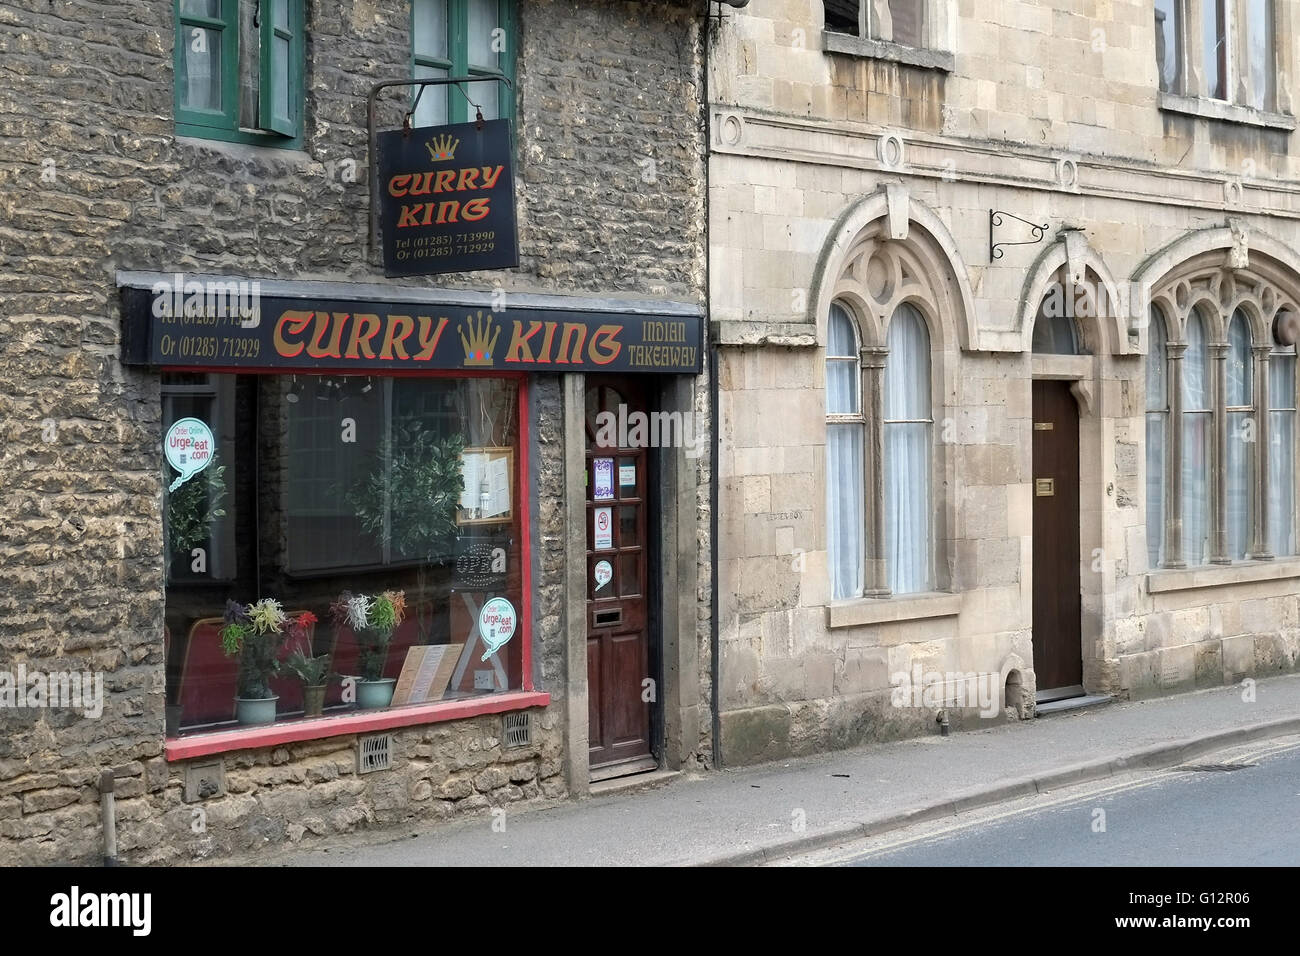 Curry restaurant in Fairford, Gloucestershire, England, UK Stock Photo